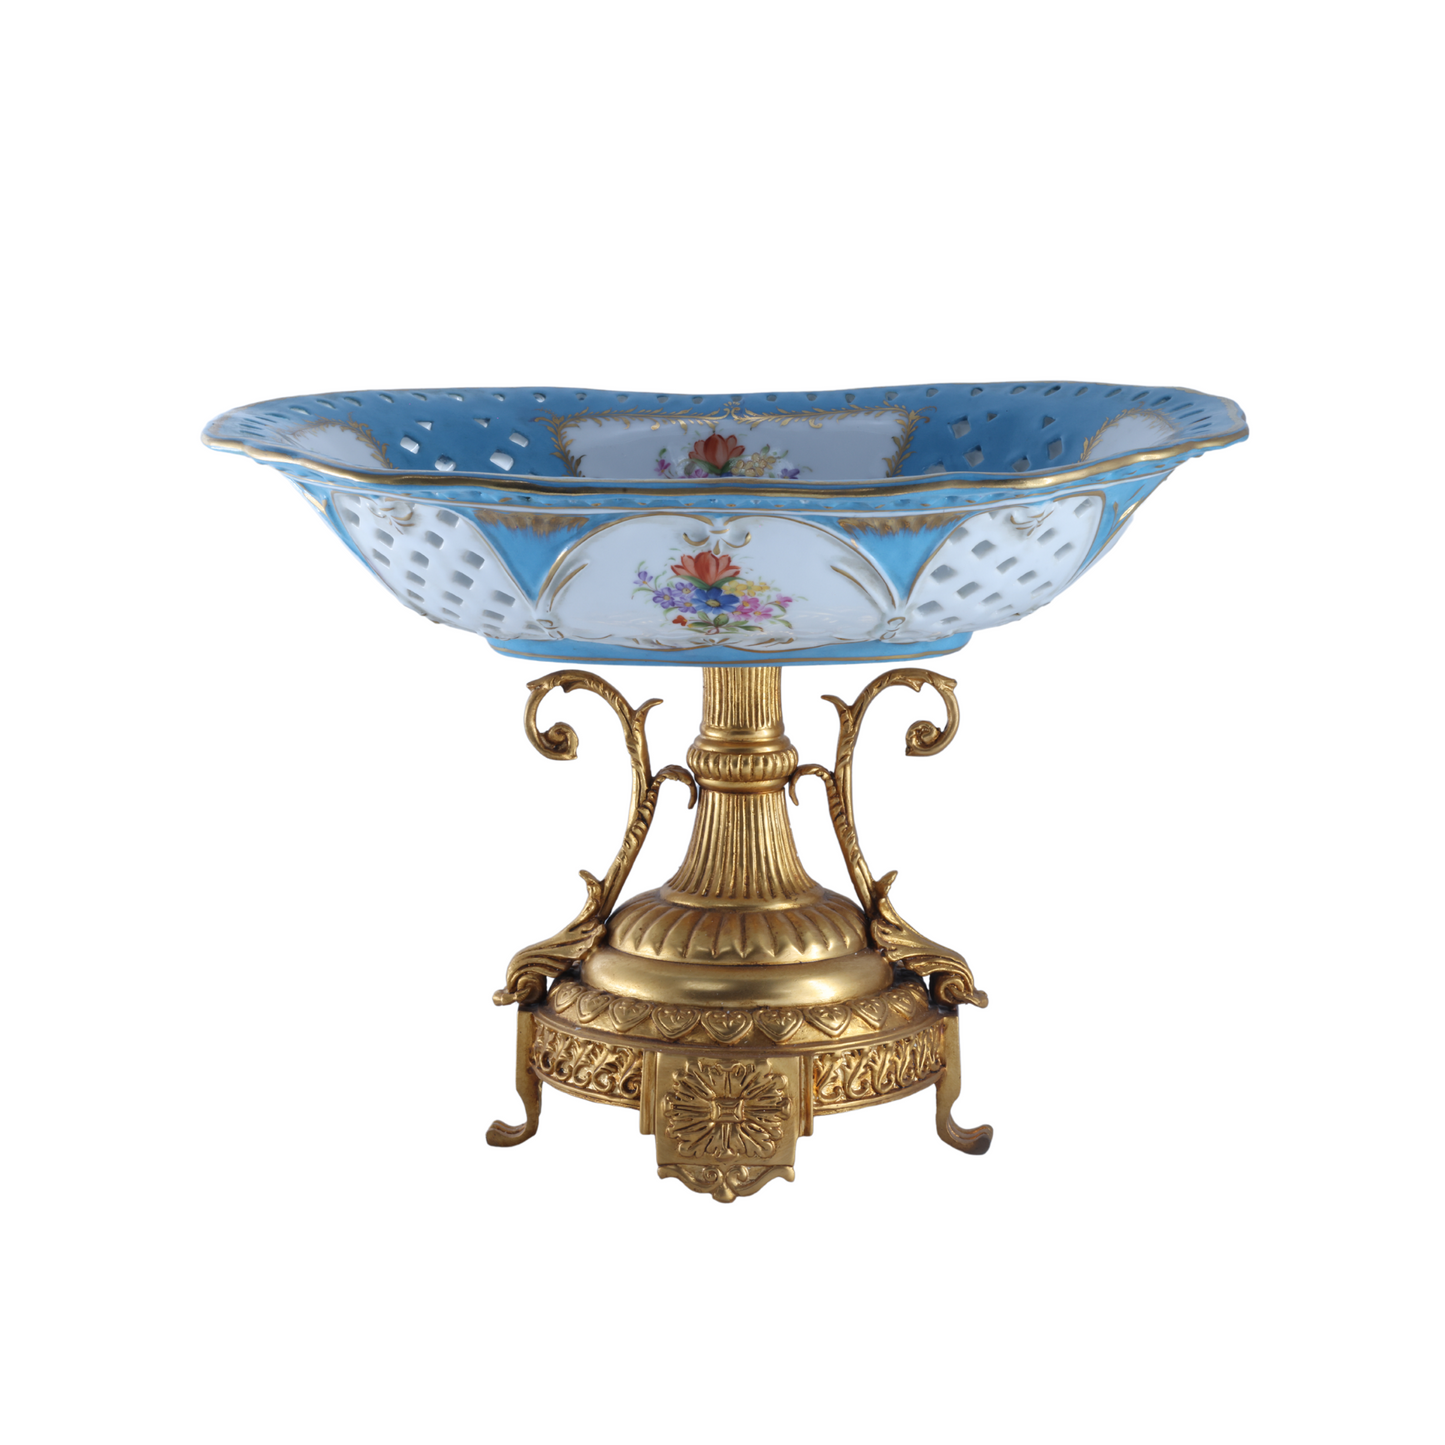 Oval Fruit Bowl With Baroque Floral Motif